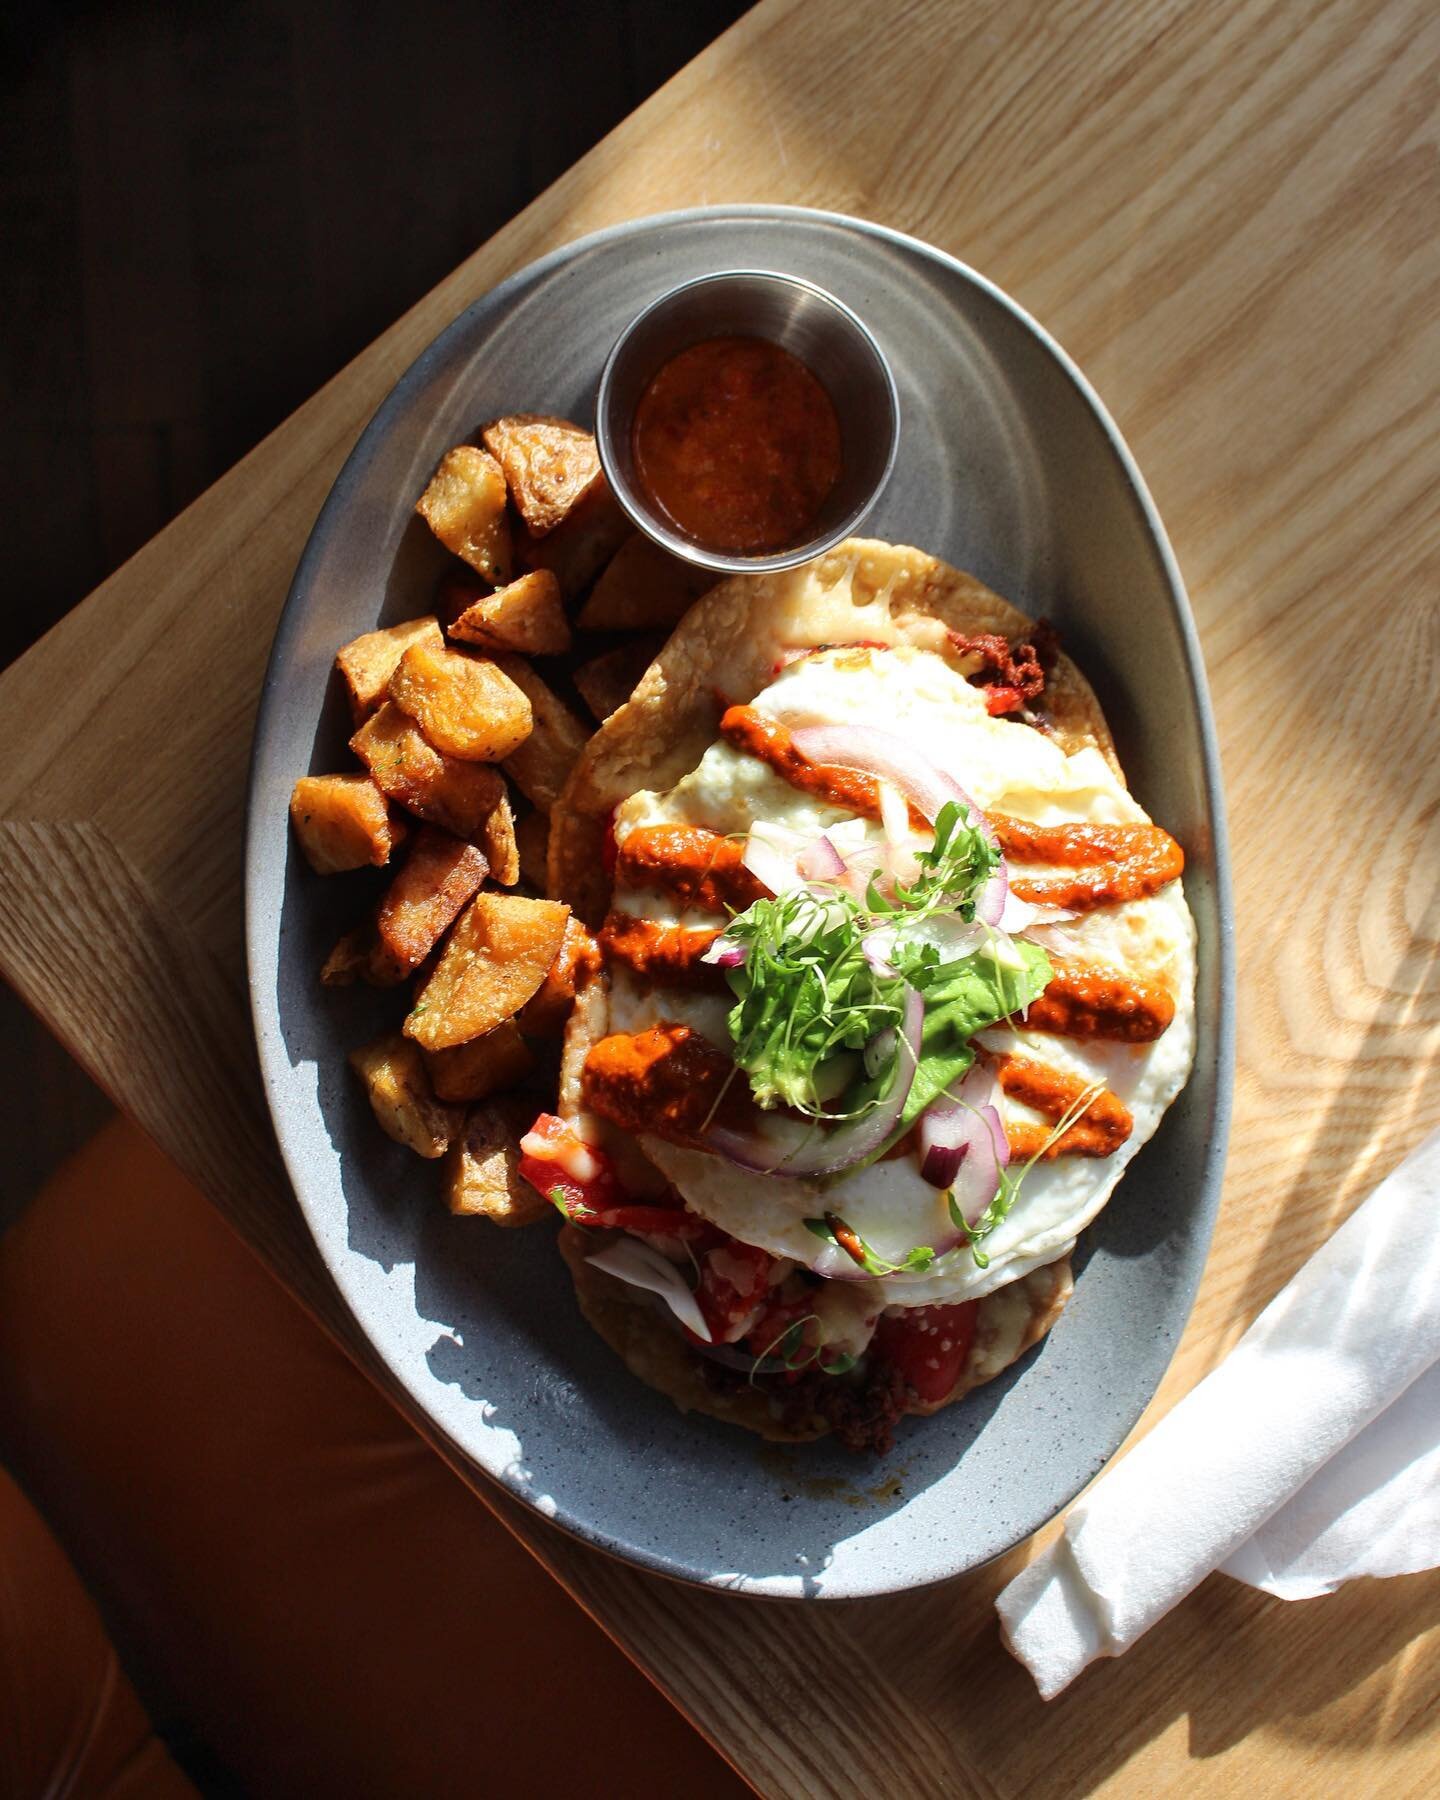 Snow Day + schools closed + you ran through your weekly groceries. All signs point to brunch! Cafe Lift will be open 8-3🍳